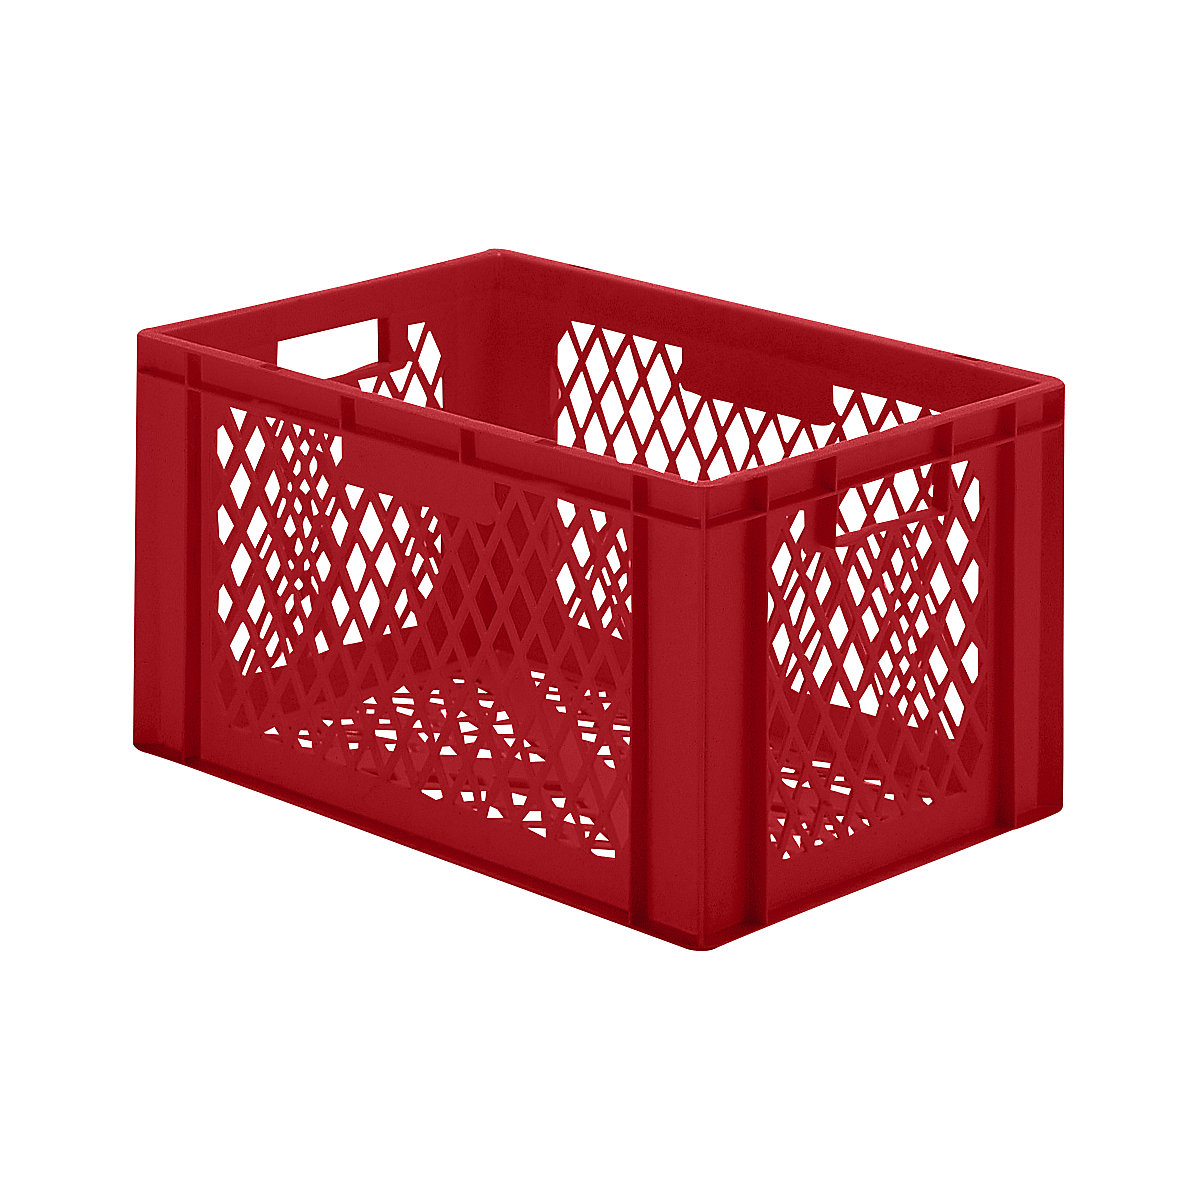 Euro stacking container, perforated walls and base, LxWxH 600 x 400 x 320 mm, red, pack of 5